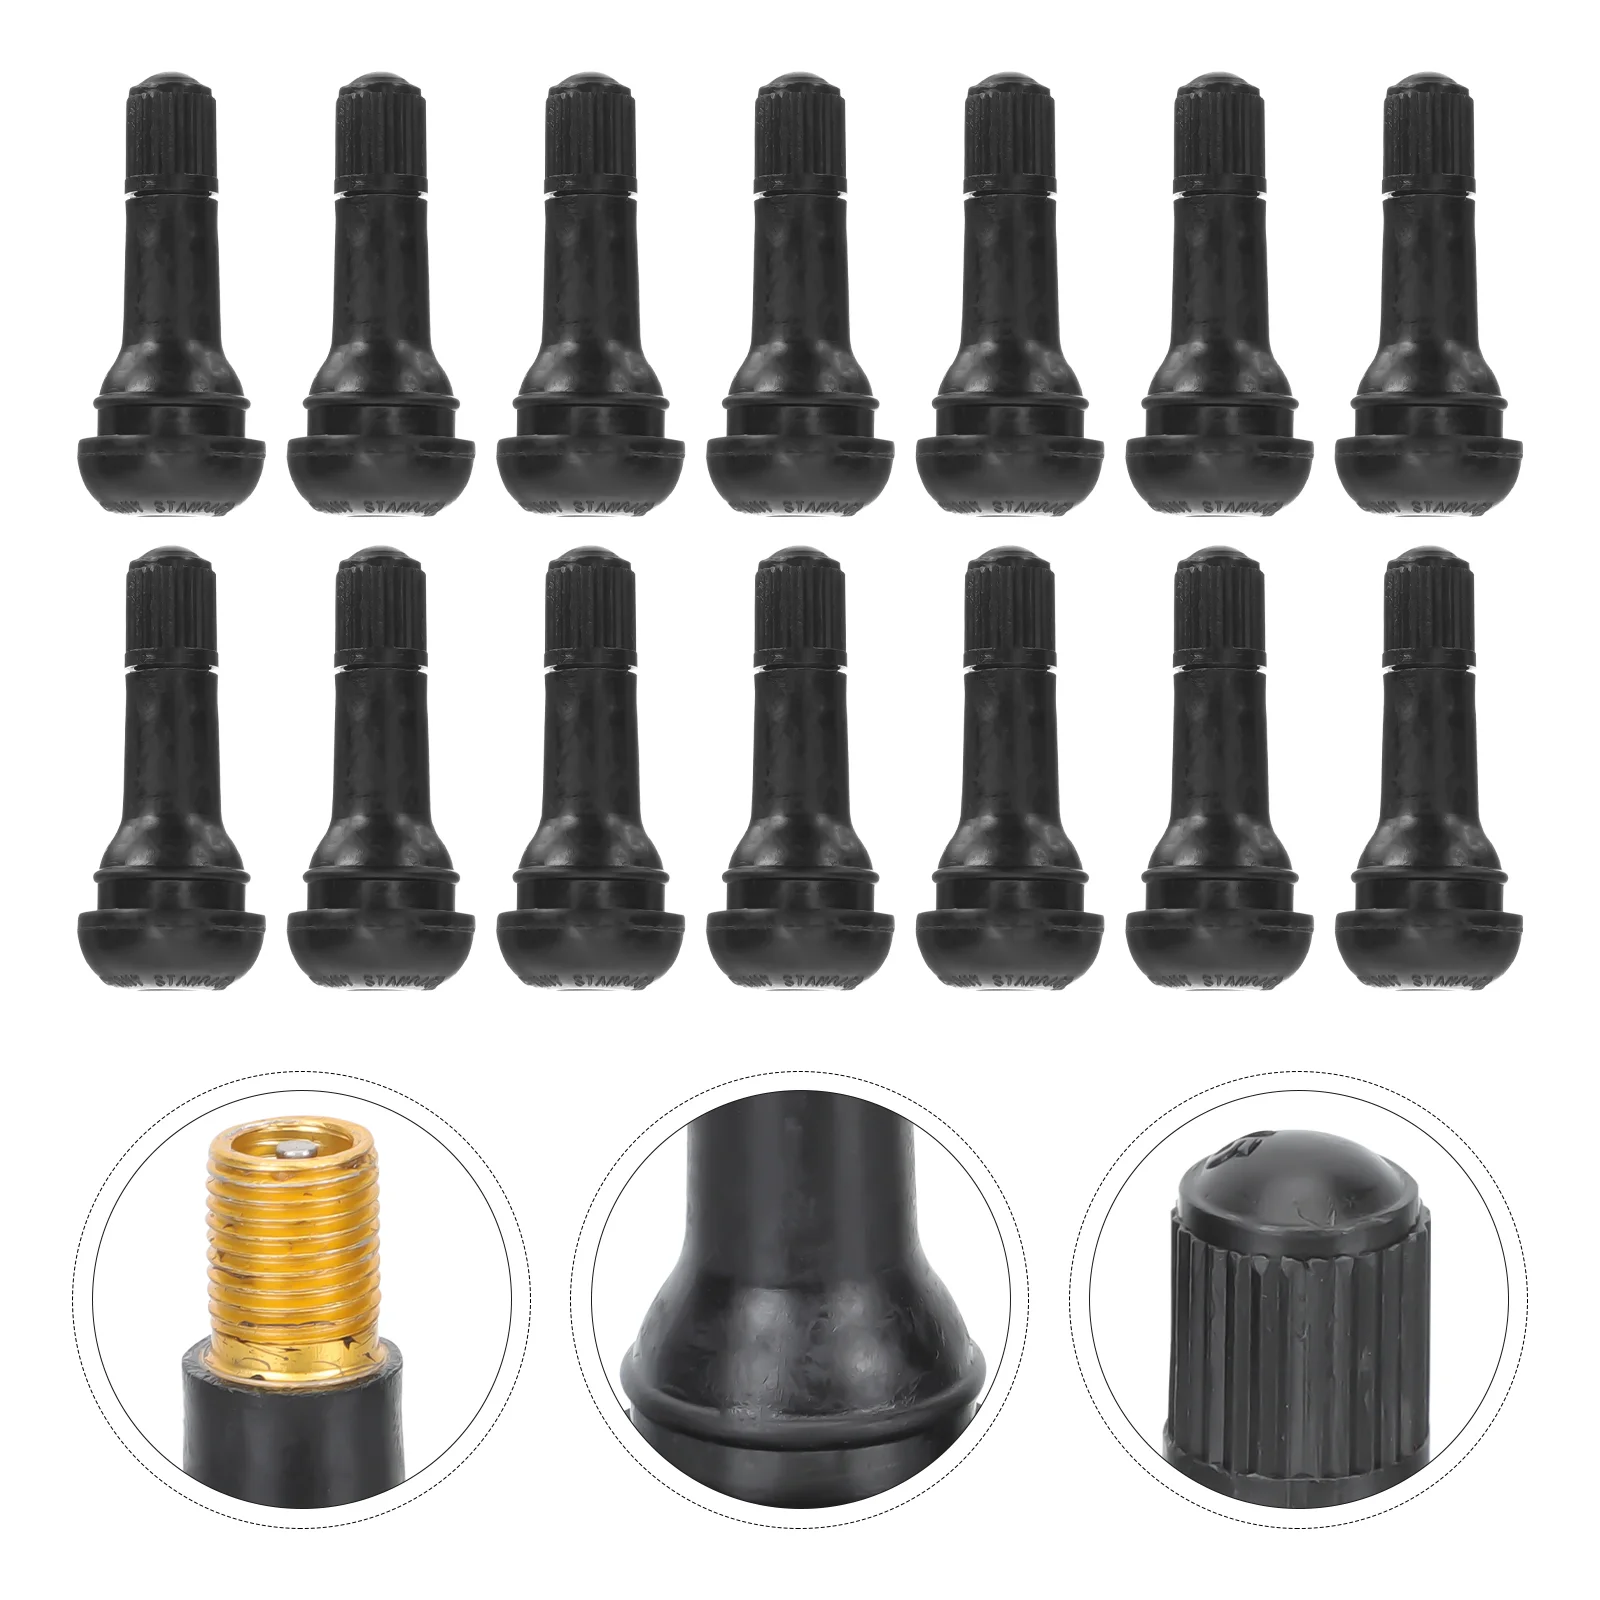 

Tire Stem Stems Tubeless Rubber Caps Tyre Snap Car Vehicle Automotive Replacement Black Tires Auto Accessories Silicone